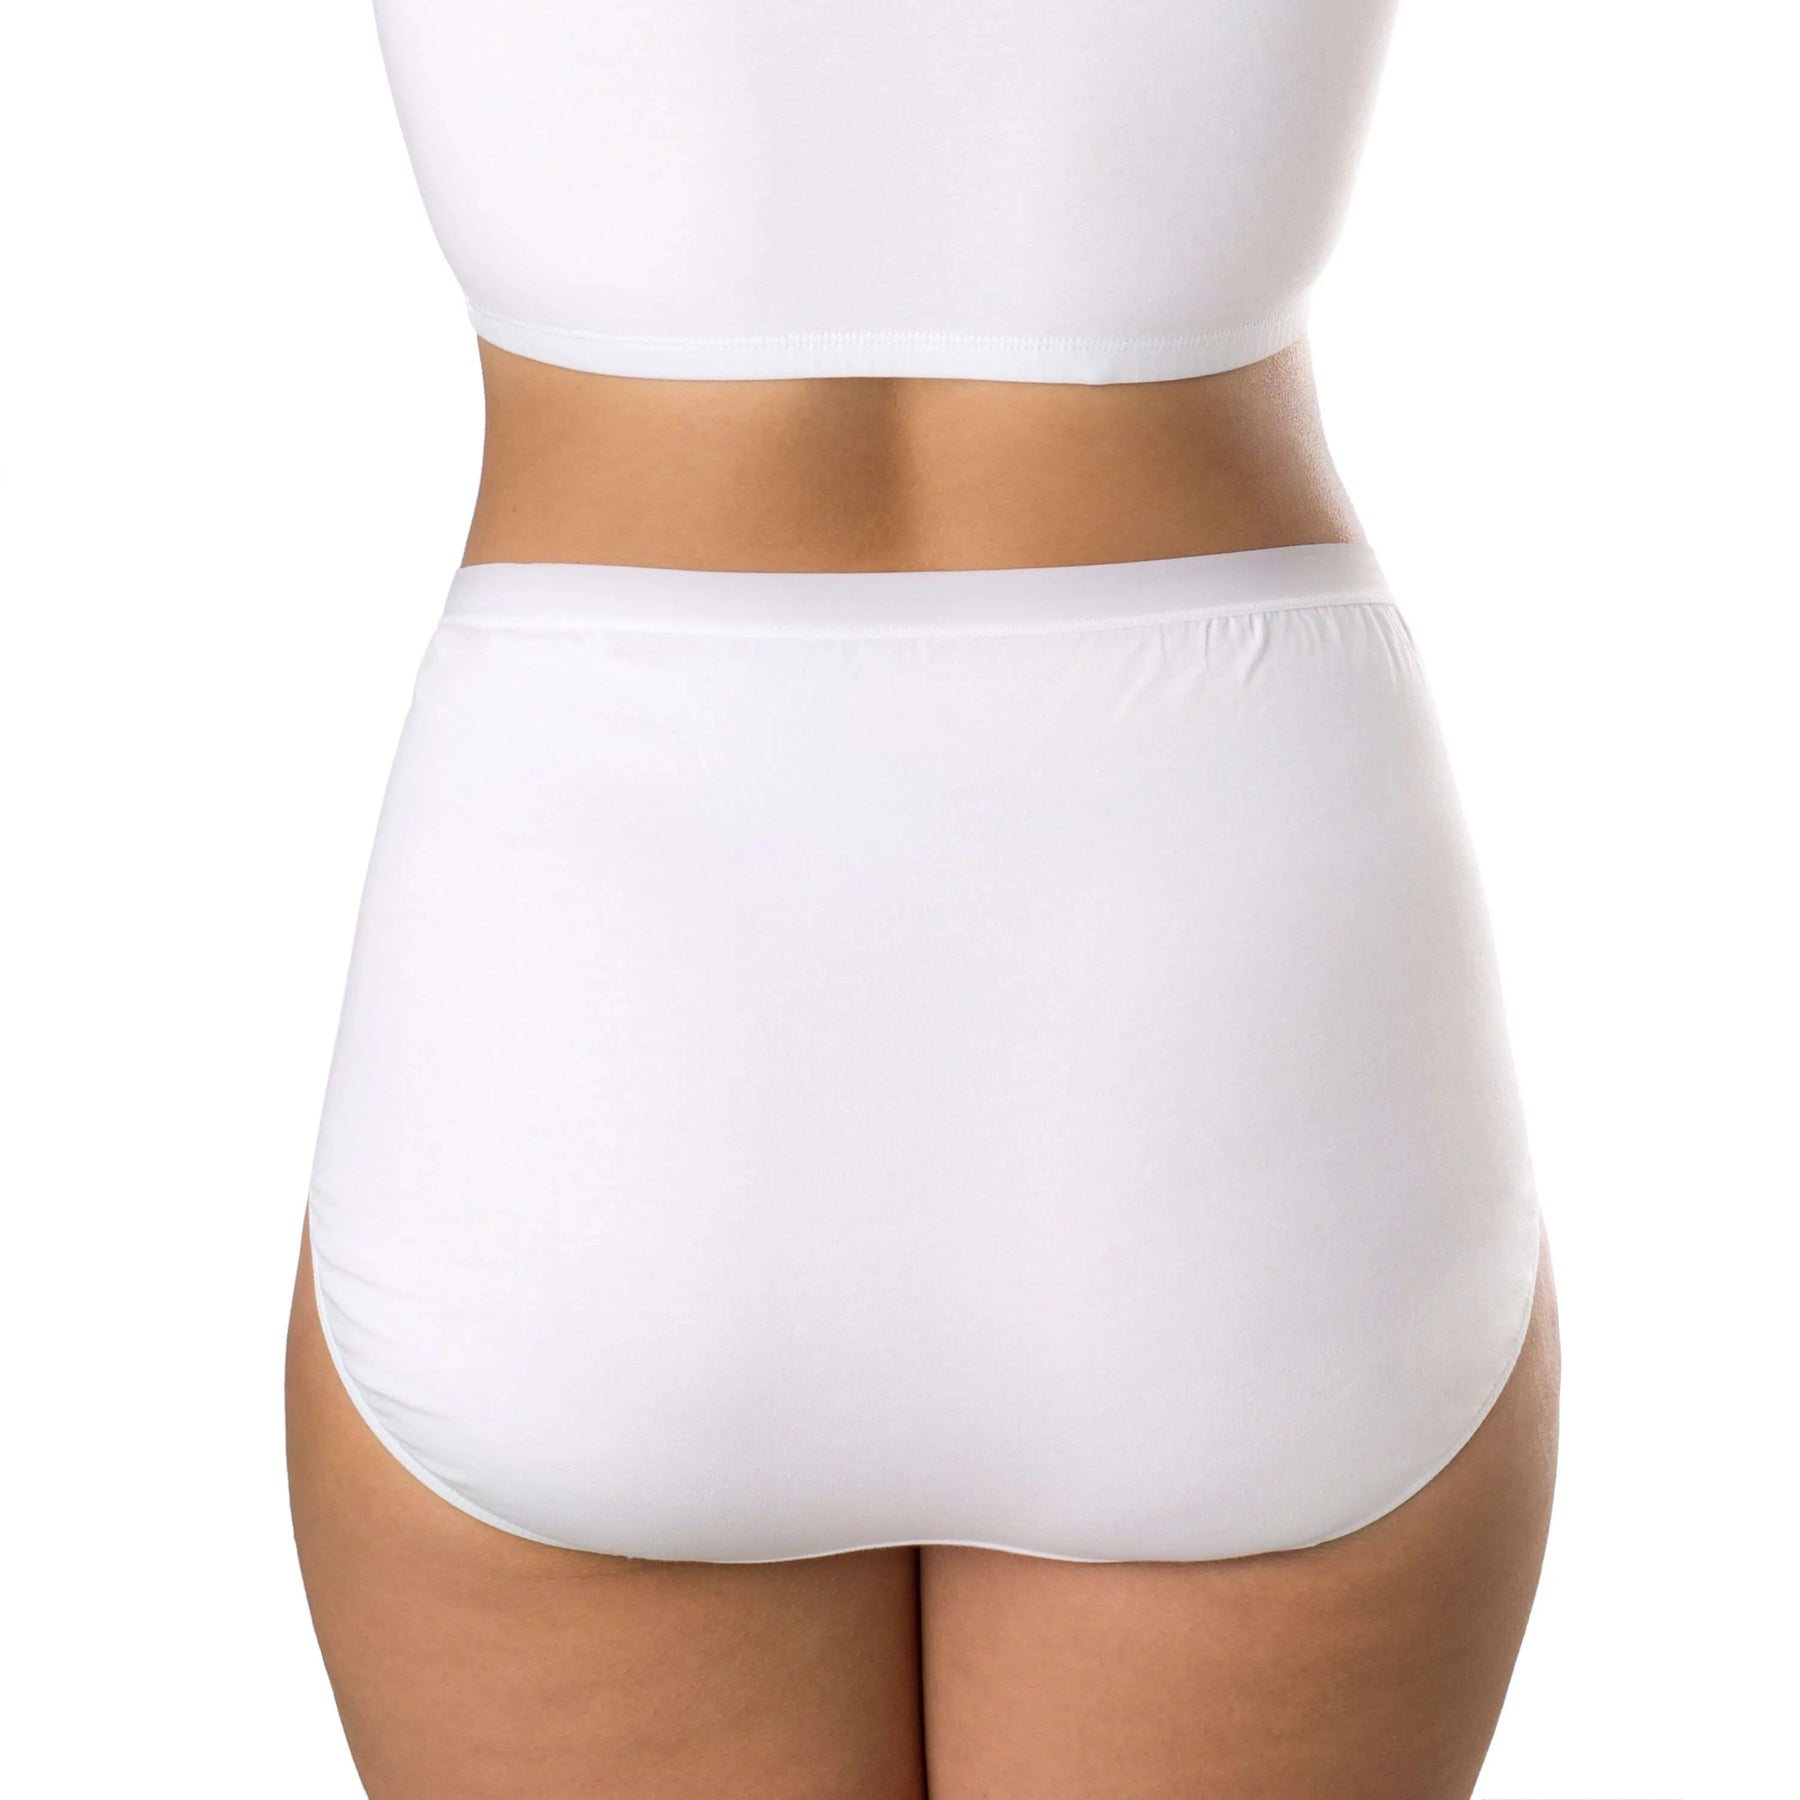 Womens Cotton Briefs Set 5 Plus Size Underwear With Panty Shorts, Brief,  And Cute Intimates For Girls 210720 From Lu04, $13.51